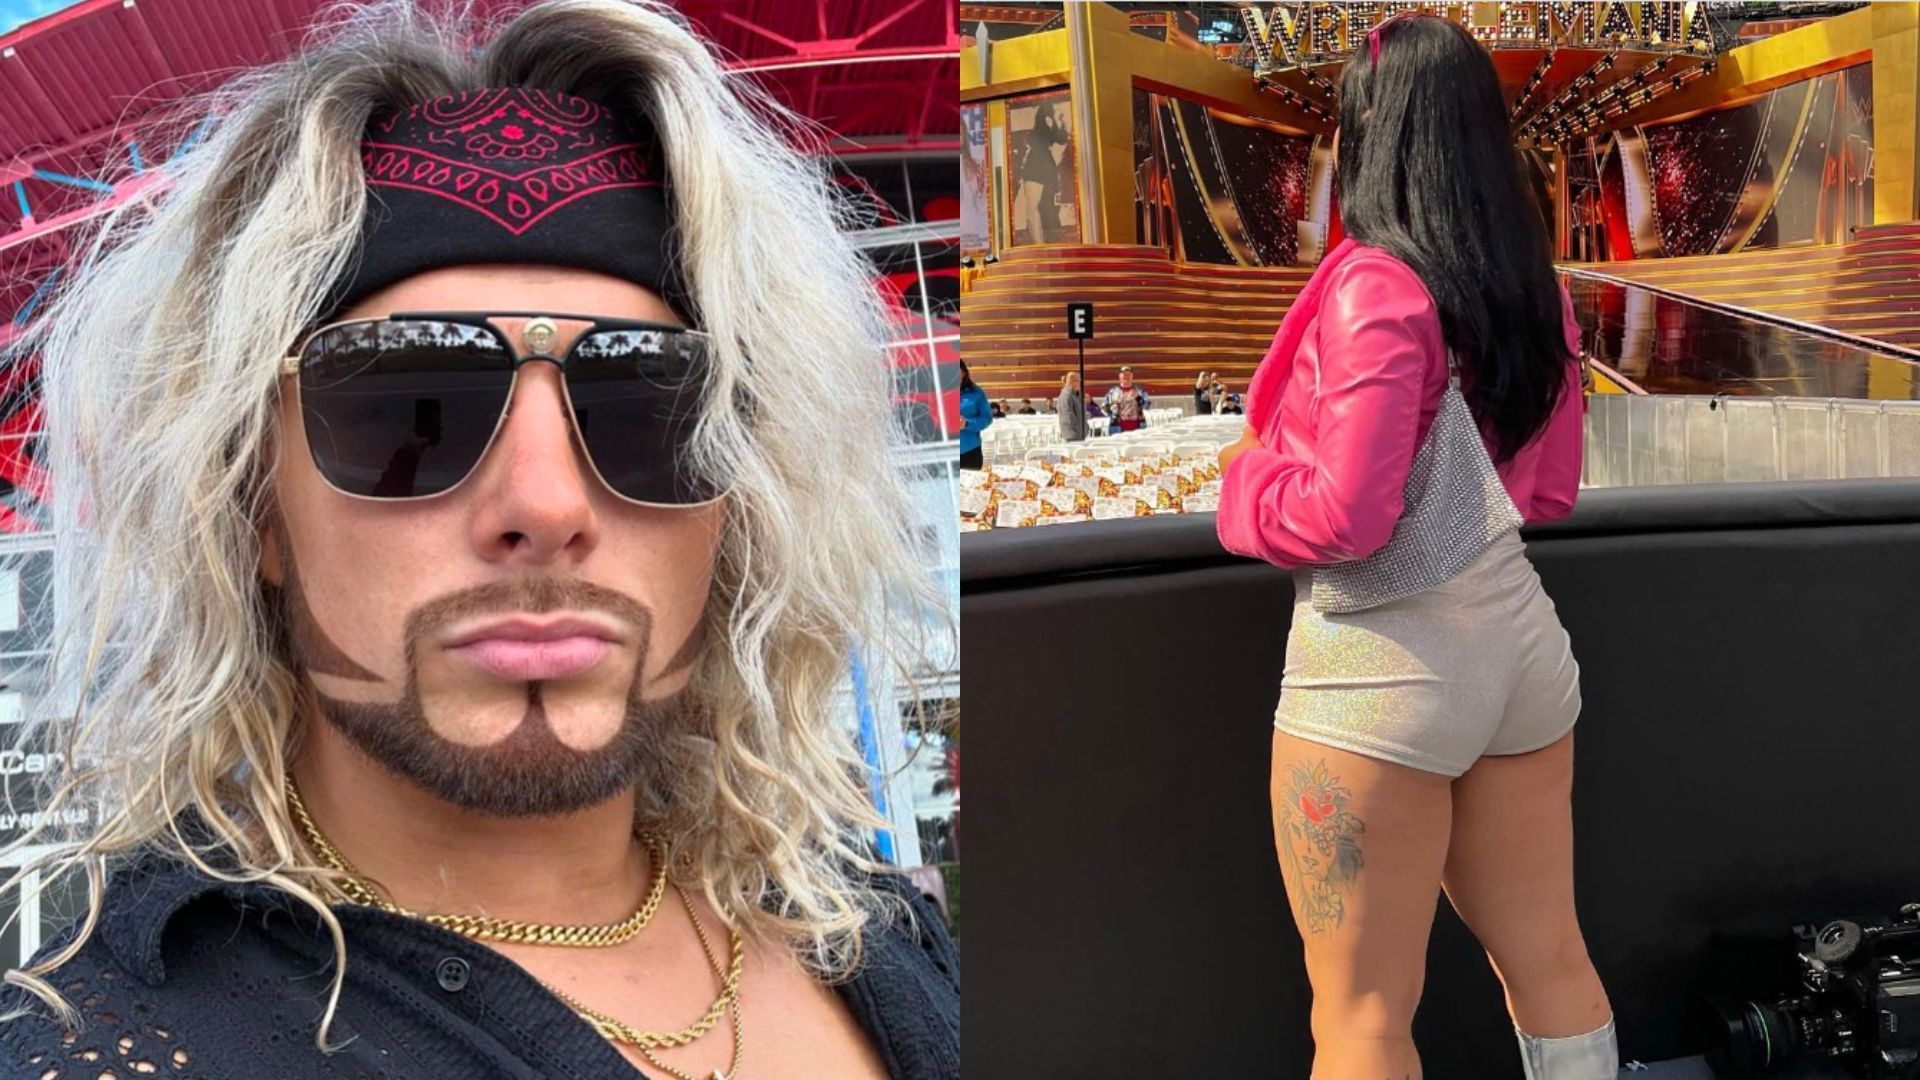 Lexis King and his girlfriend, who was recently released from WWE.